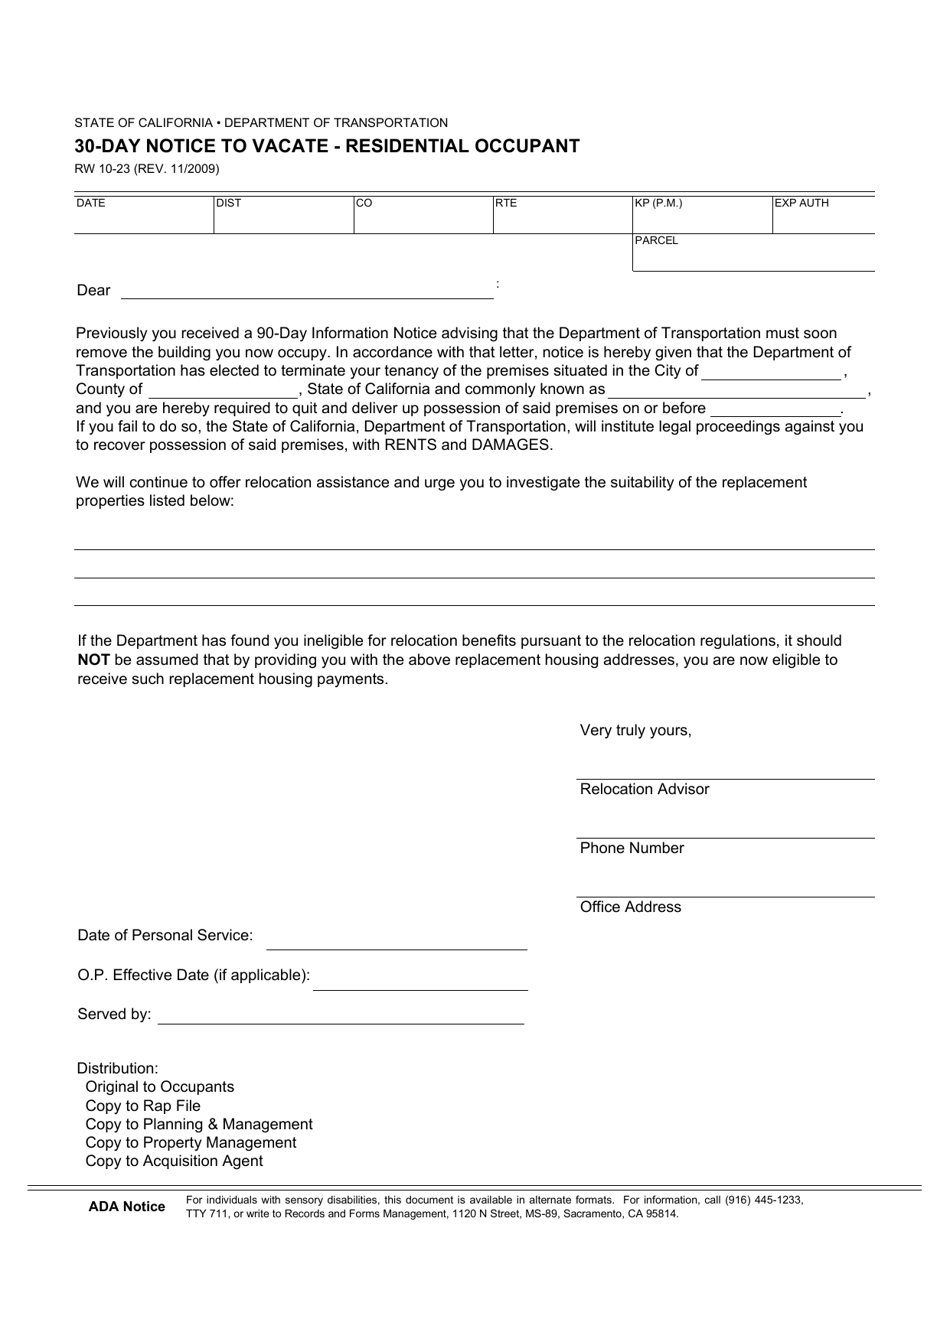 Form RW10-23 Download Fillable PDF or Fill Online 30-day ...